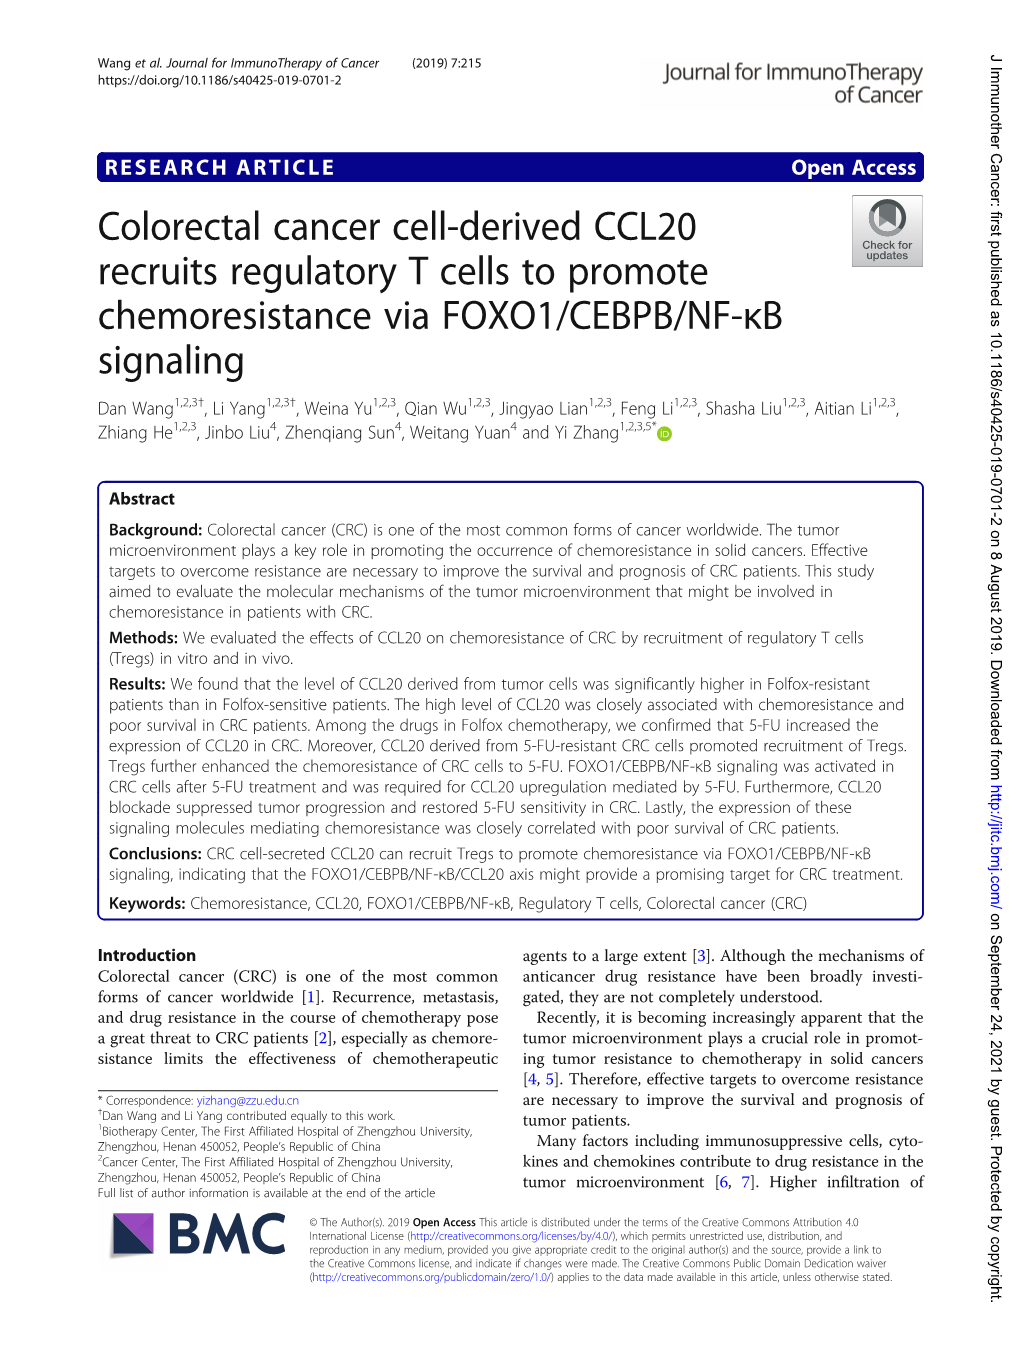 Colorectal Cancer Cell-Derived CCL20 Recruits Regulatory T Cells to Promote Chemoresistance Via FOXO1/CEBPB/NF-Κb Signaling